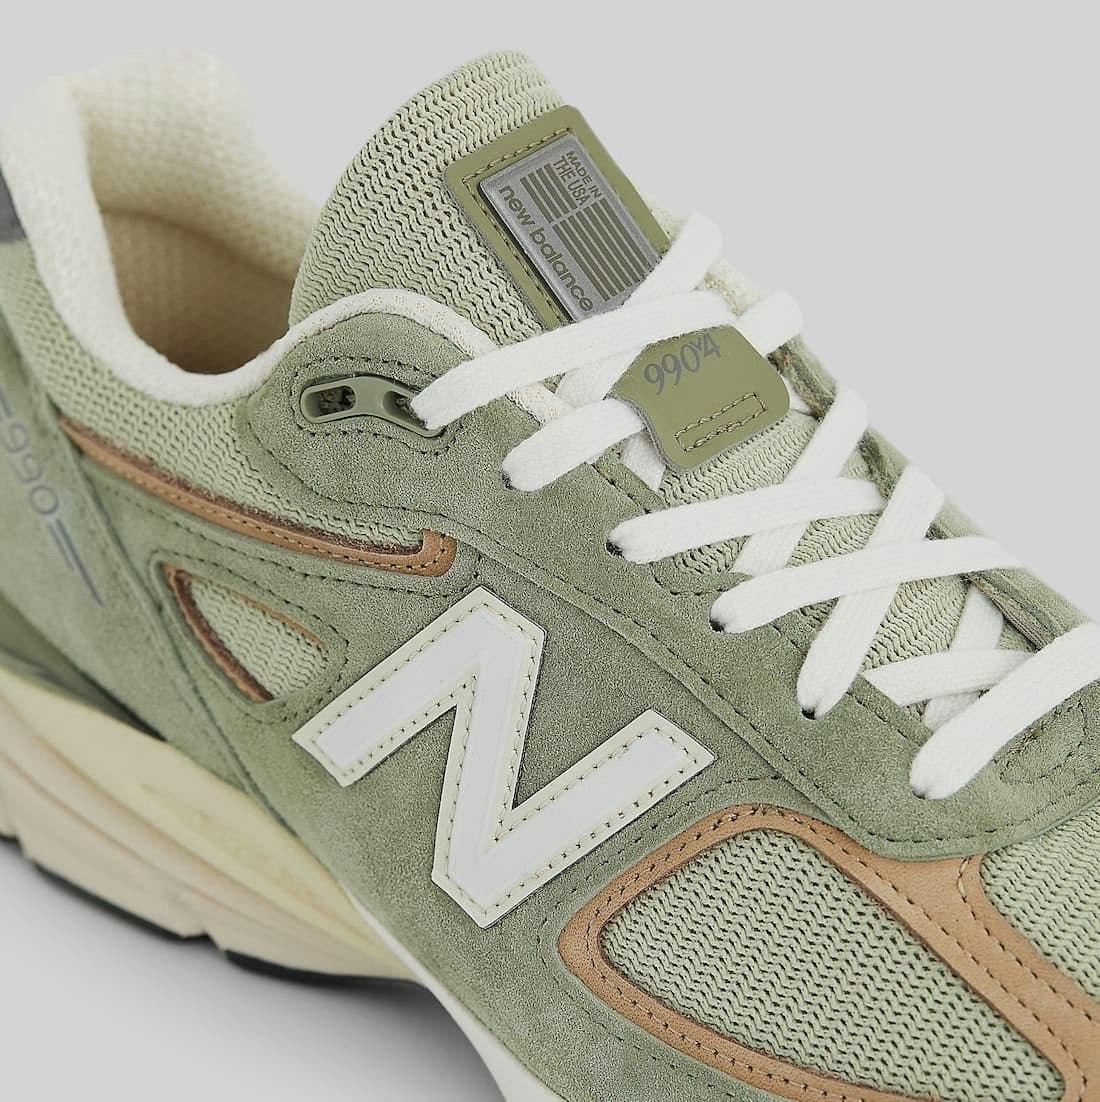 New Balance 990v4 "Made in USA" (Olive)